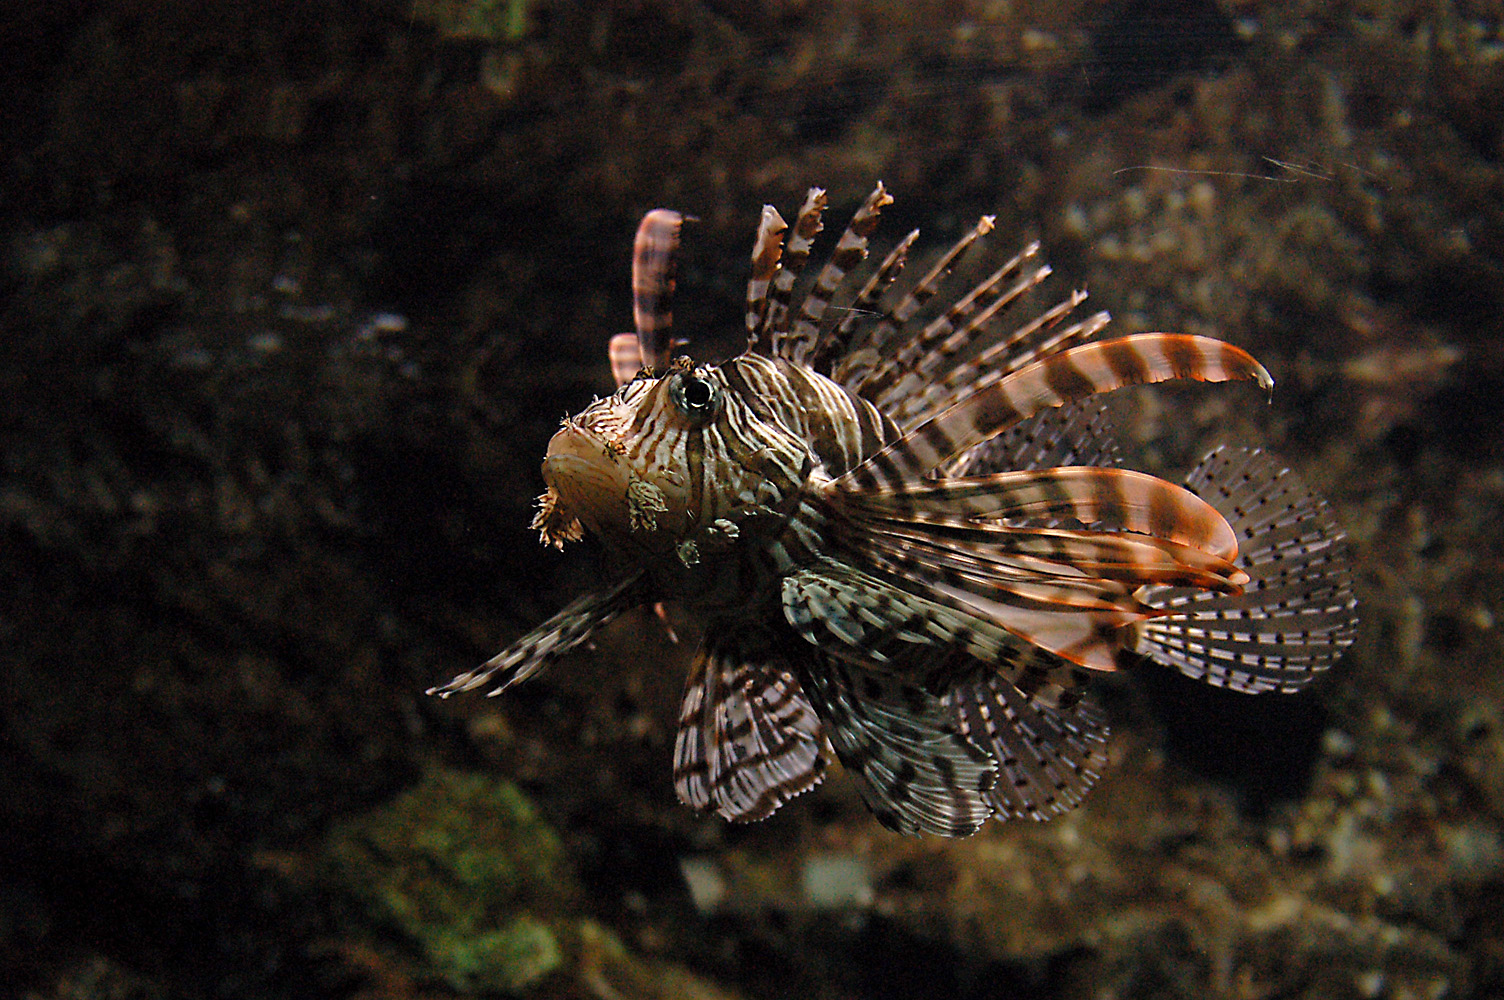 an image of lion fish swimming in the water